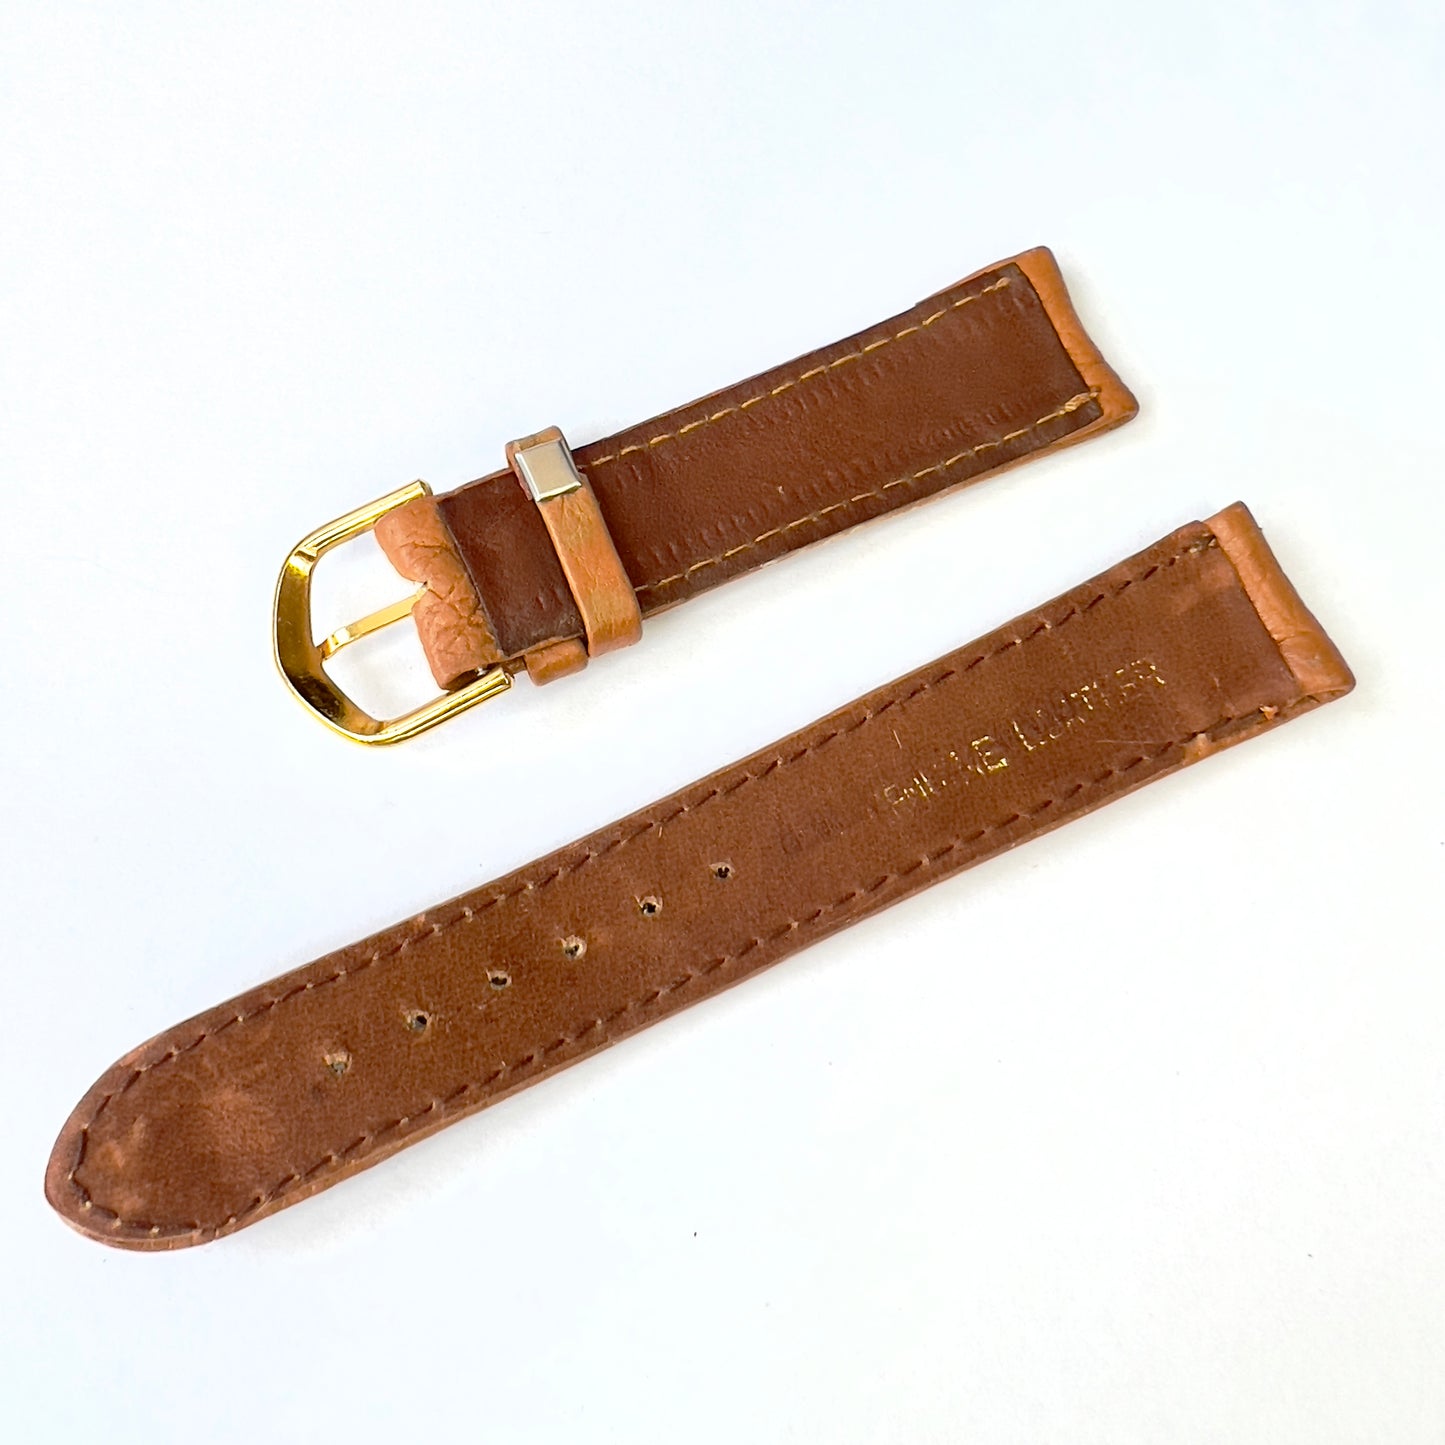 19/16mm Light Brown Leather Strap Band with Gold Tone Buckle